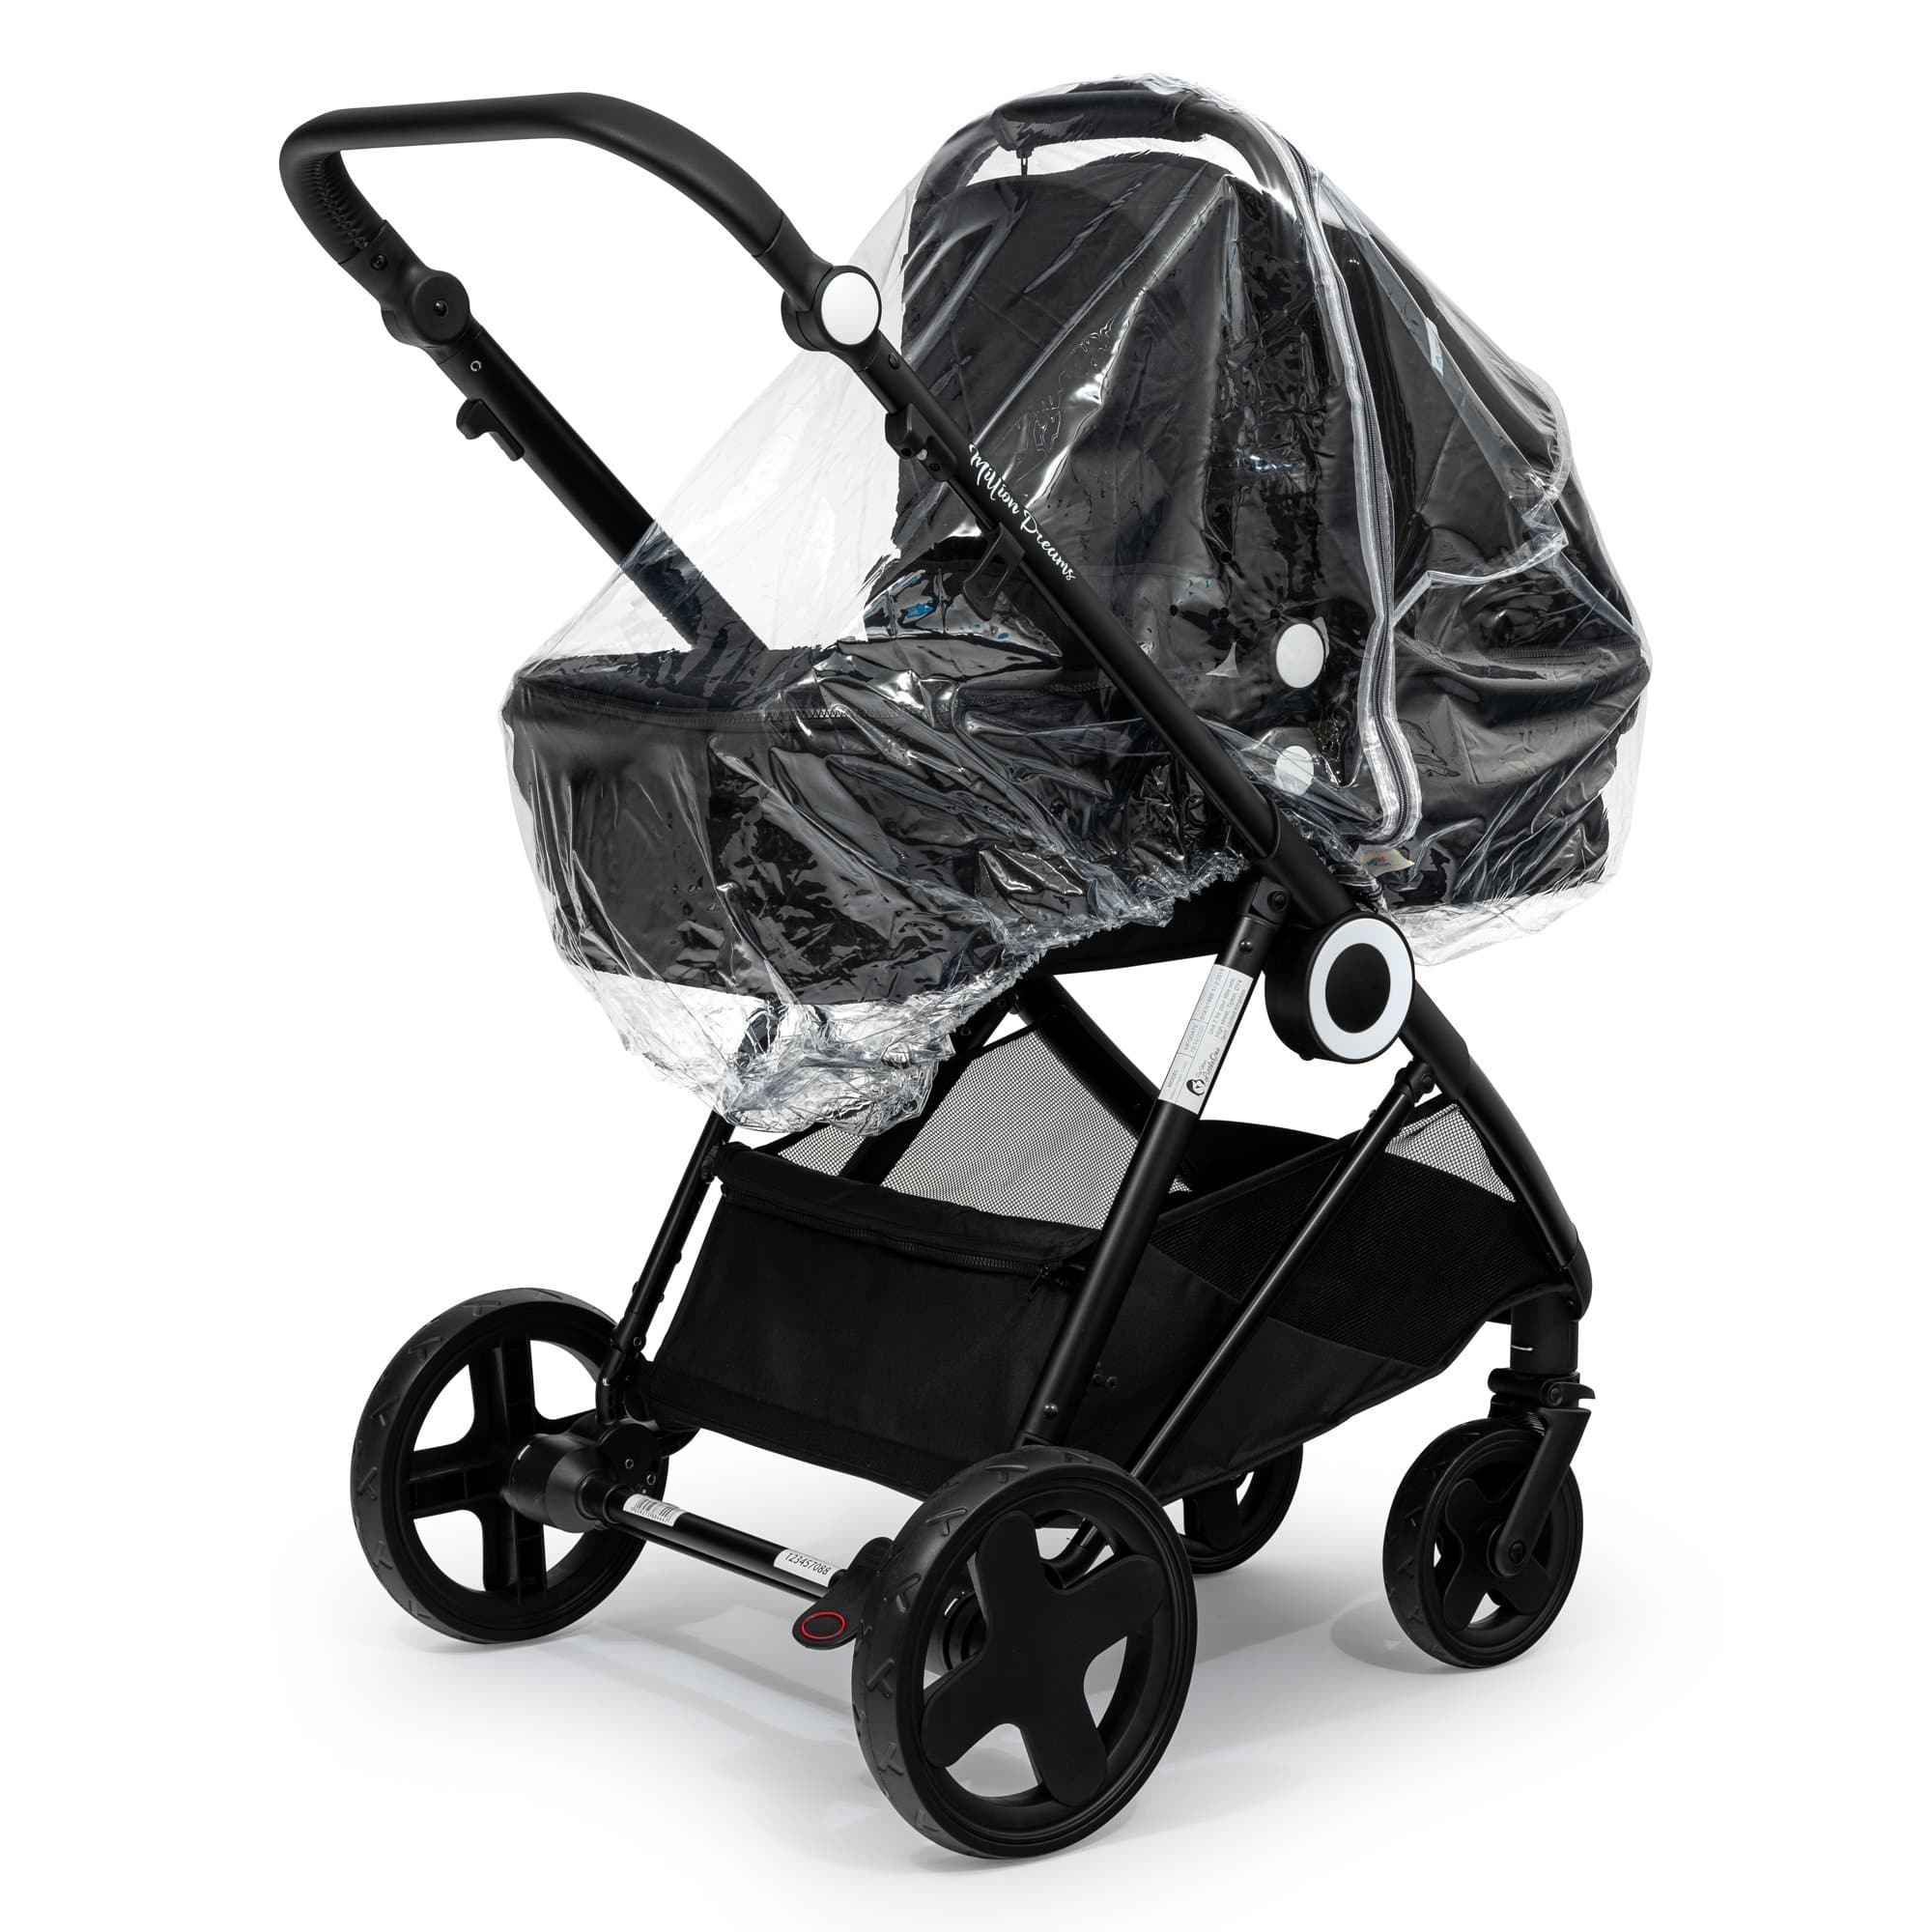 2 in 1 Rain Cover Compatible with Noukies - Fits All Models - For Your Little One